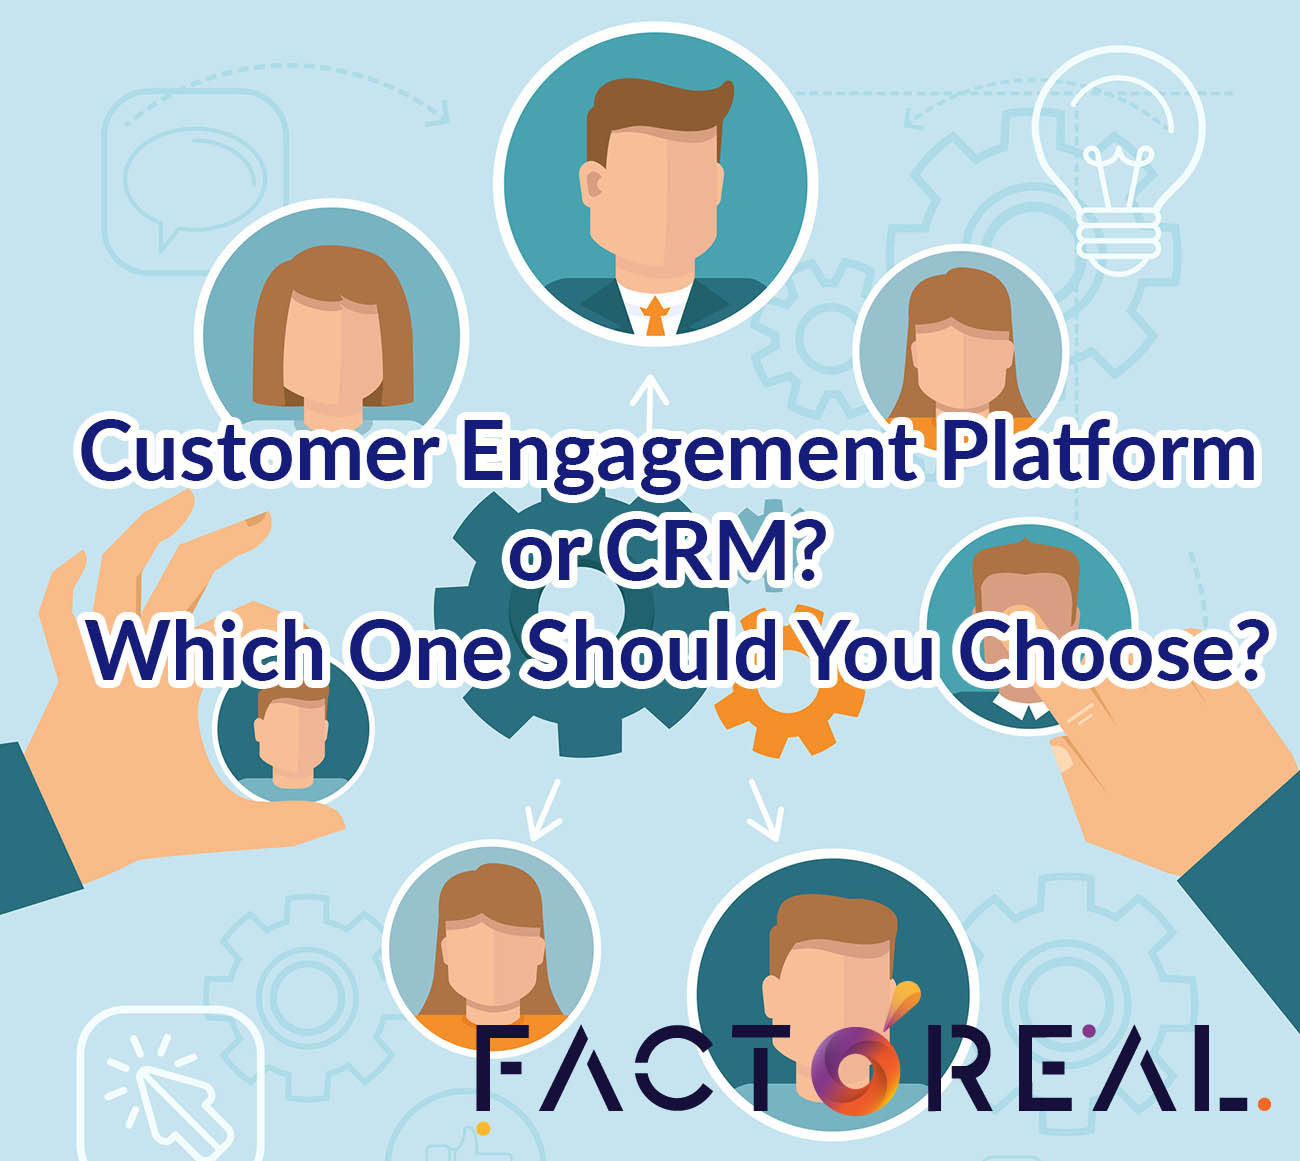 Customer Engagement Platform or CRM? Which One Should You Choose?